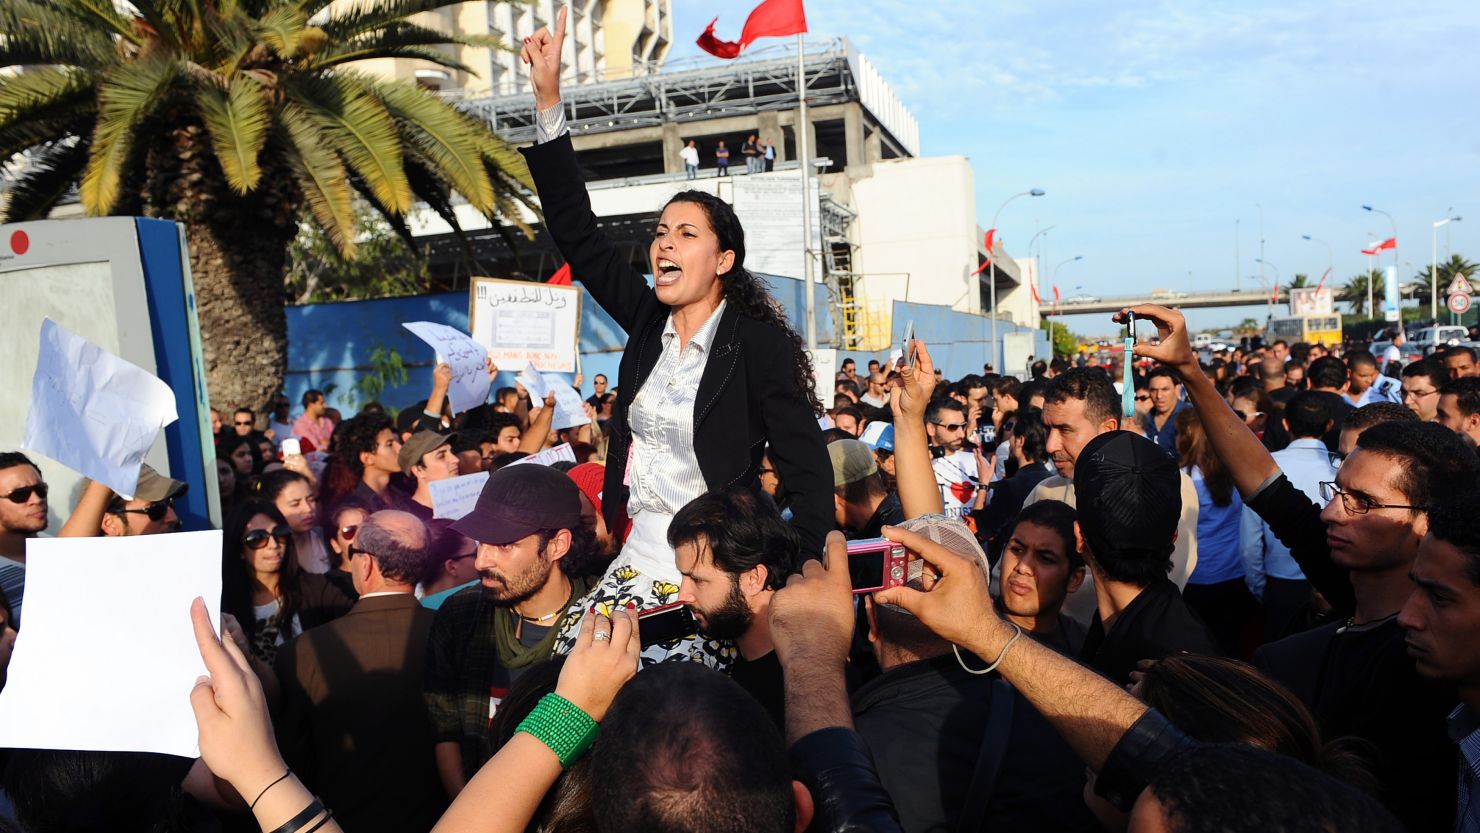 Tunisians protest against the results of the country's first democratic vote, claiming fraud, on Tuesday.